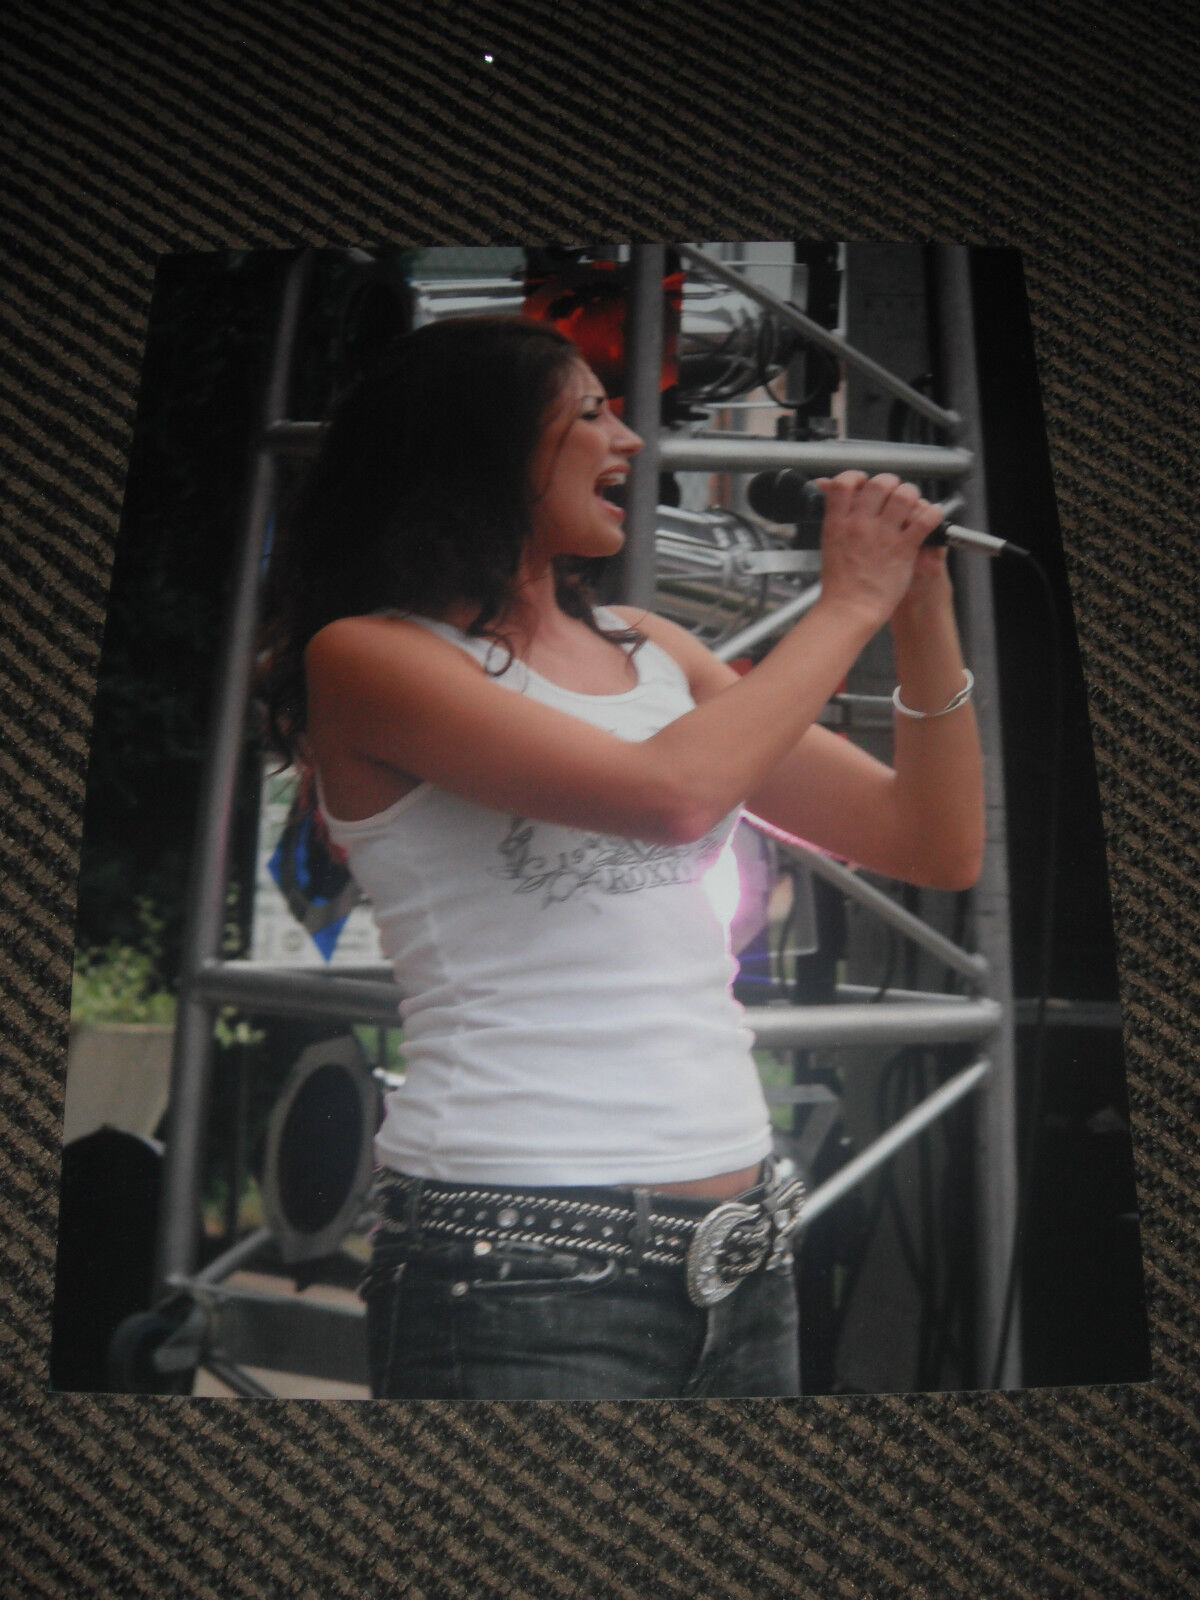 Danielle Peck Live Music Color 8x10 Photo Poster painting Promo Picture